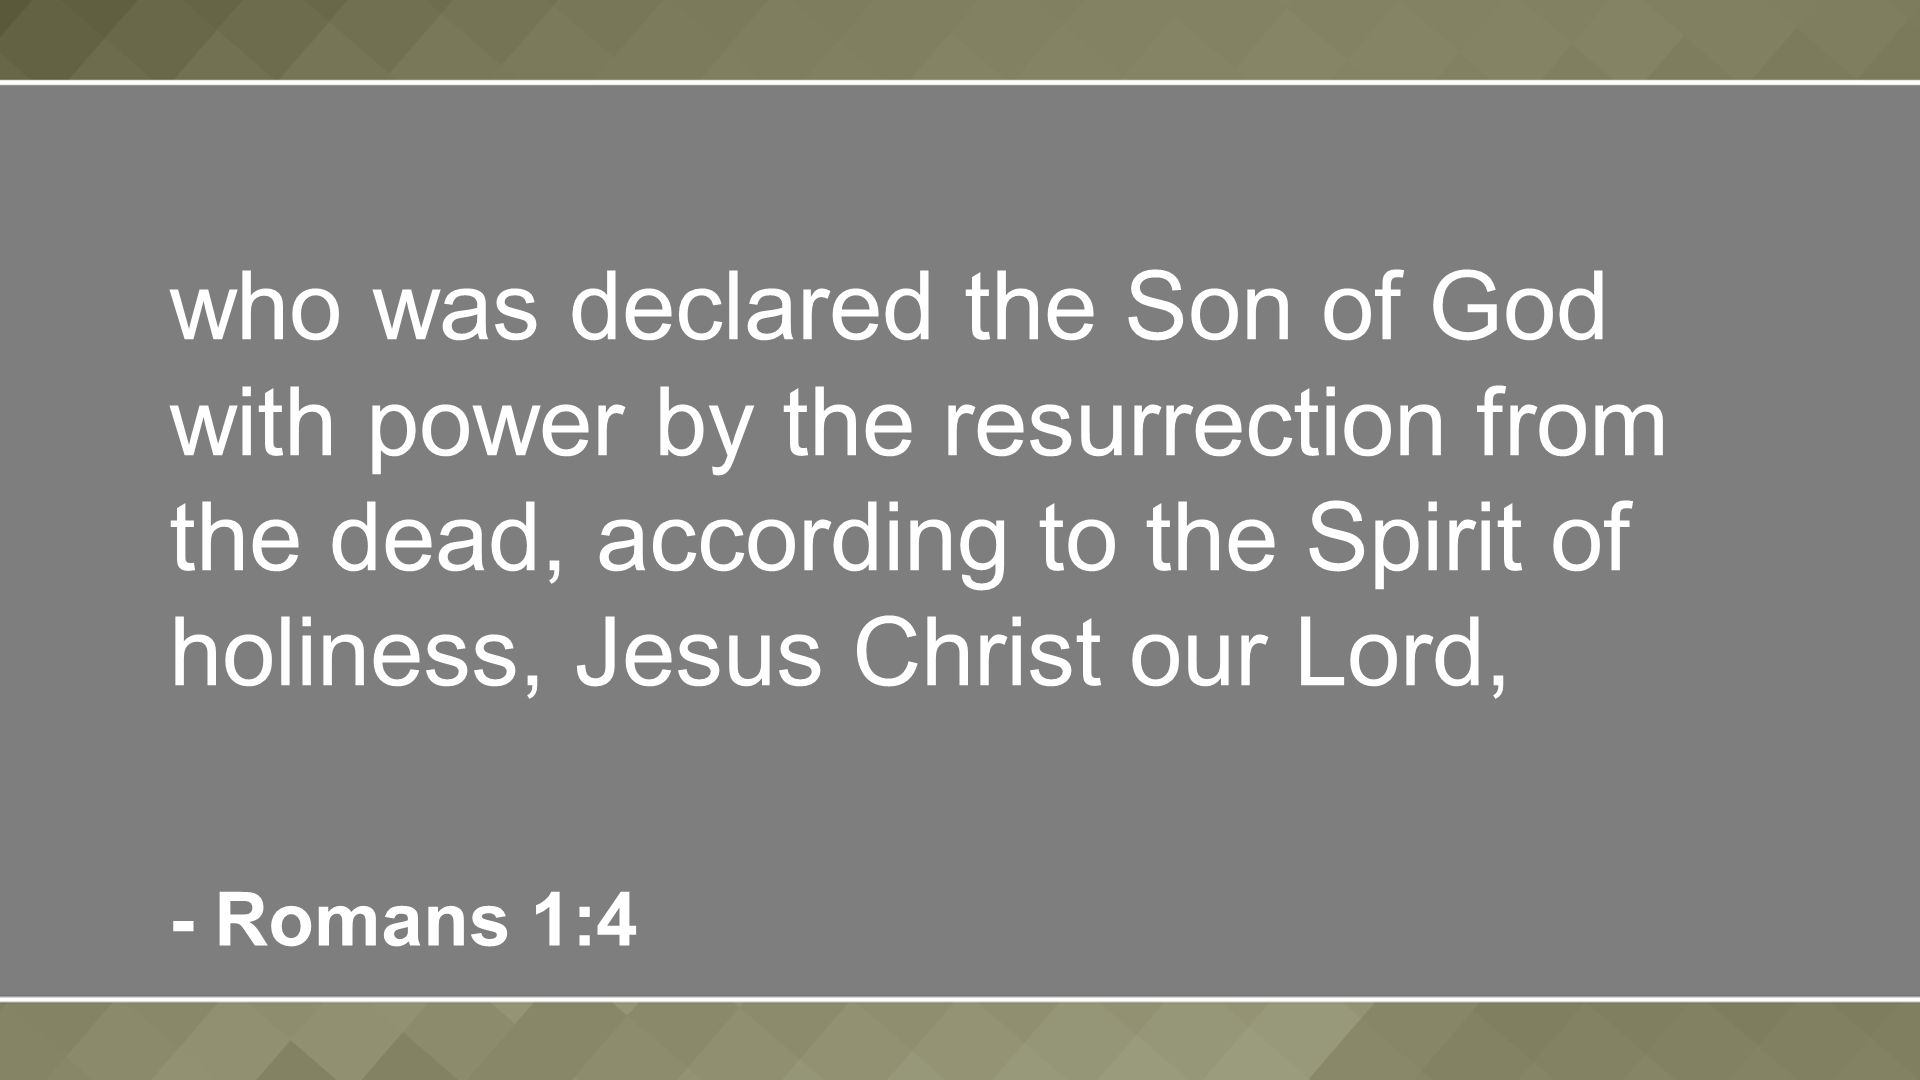 who was declared the Son of God with power by the resurrection from the dead, according to the Spirit of holiness, Jesus Christ our Lord, - Romans 1:4